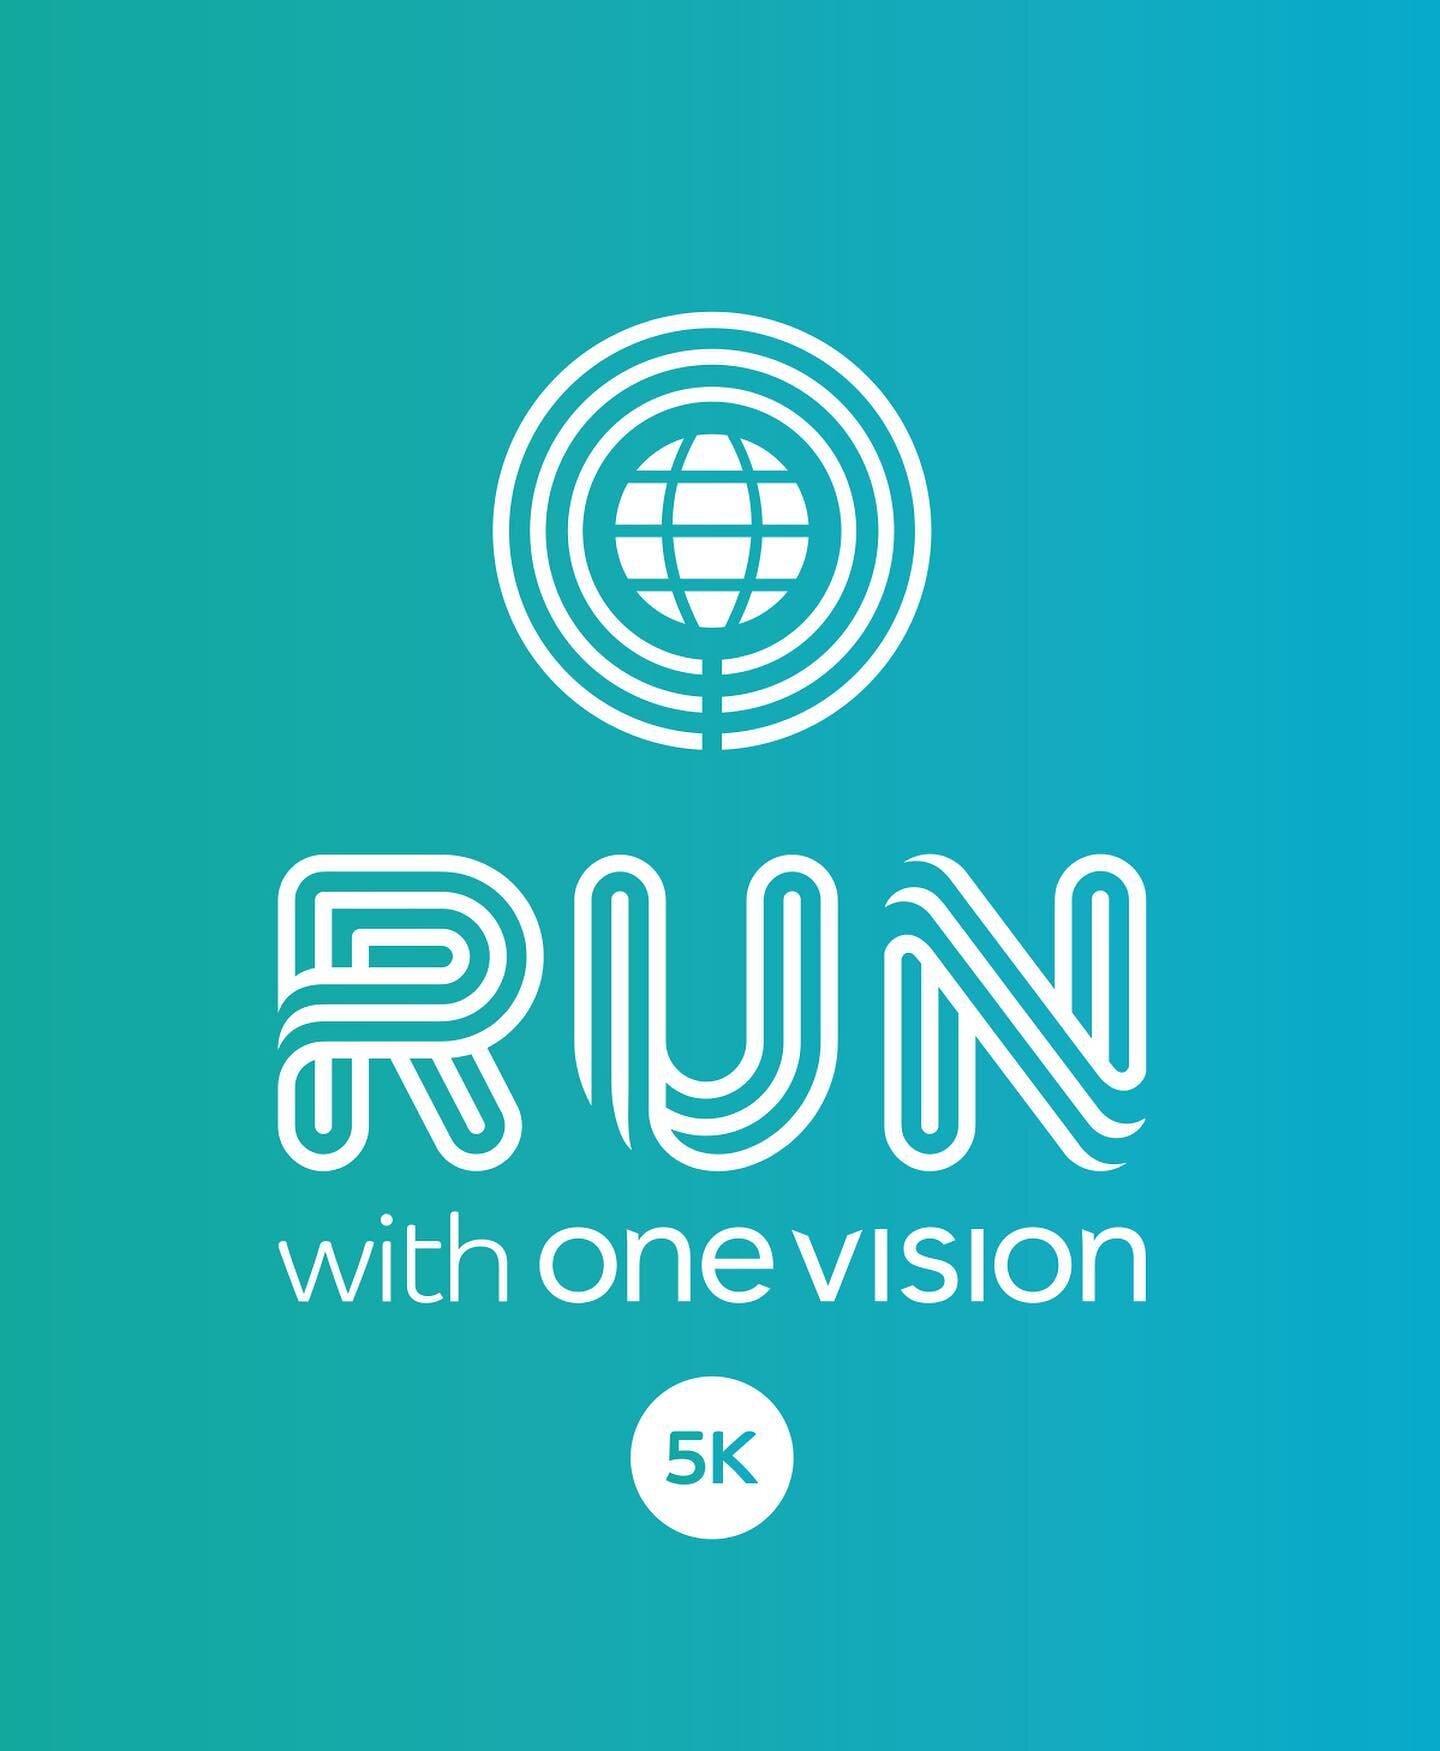 Mark your calendar! Run/ Walk with One Vision International will be on Saturday, October 29th this year! 👟

More details to follow!